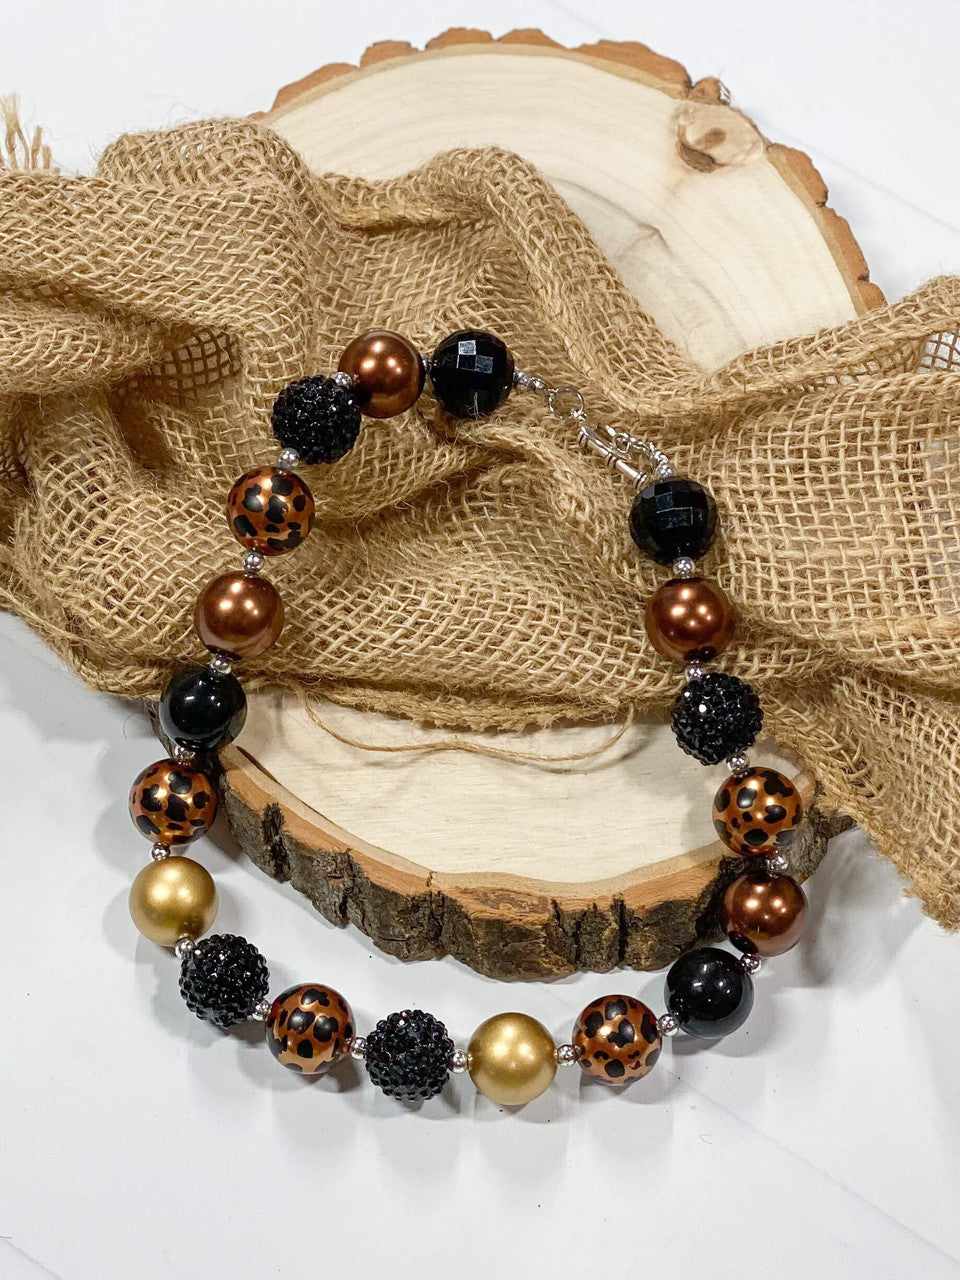 Girl's chunky bead necklace with black, gold, and leopard print beads.